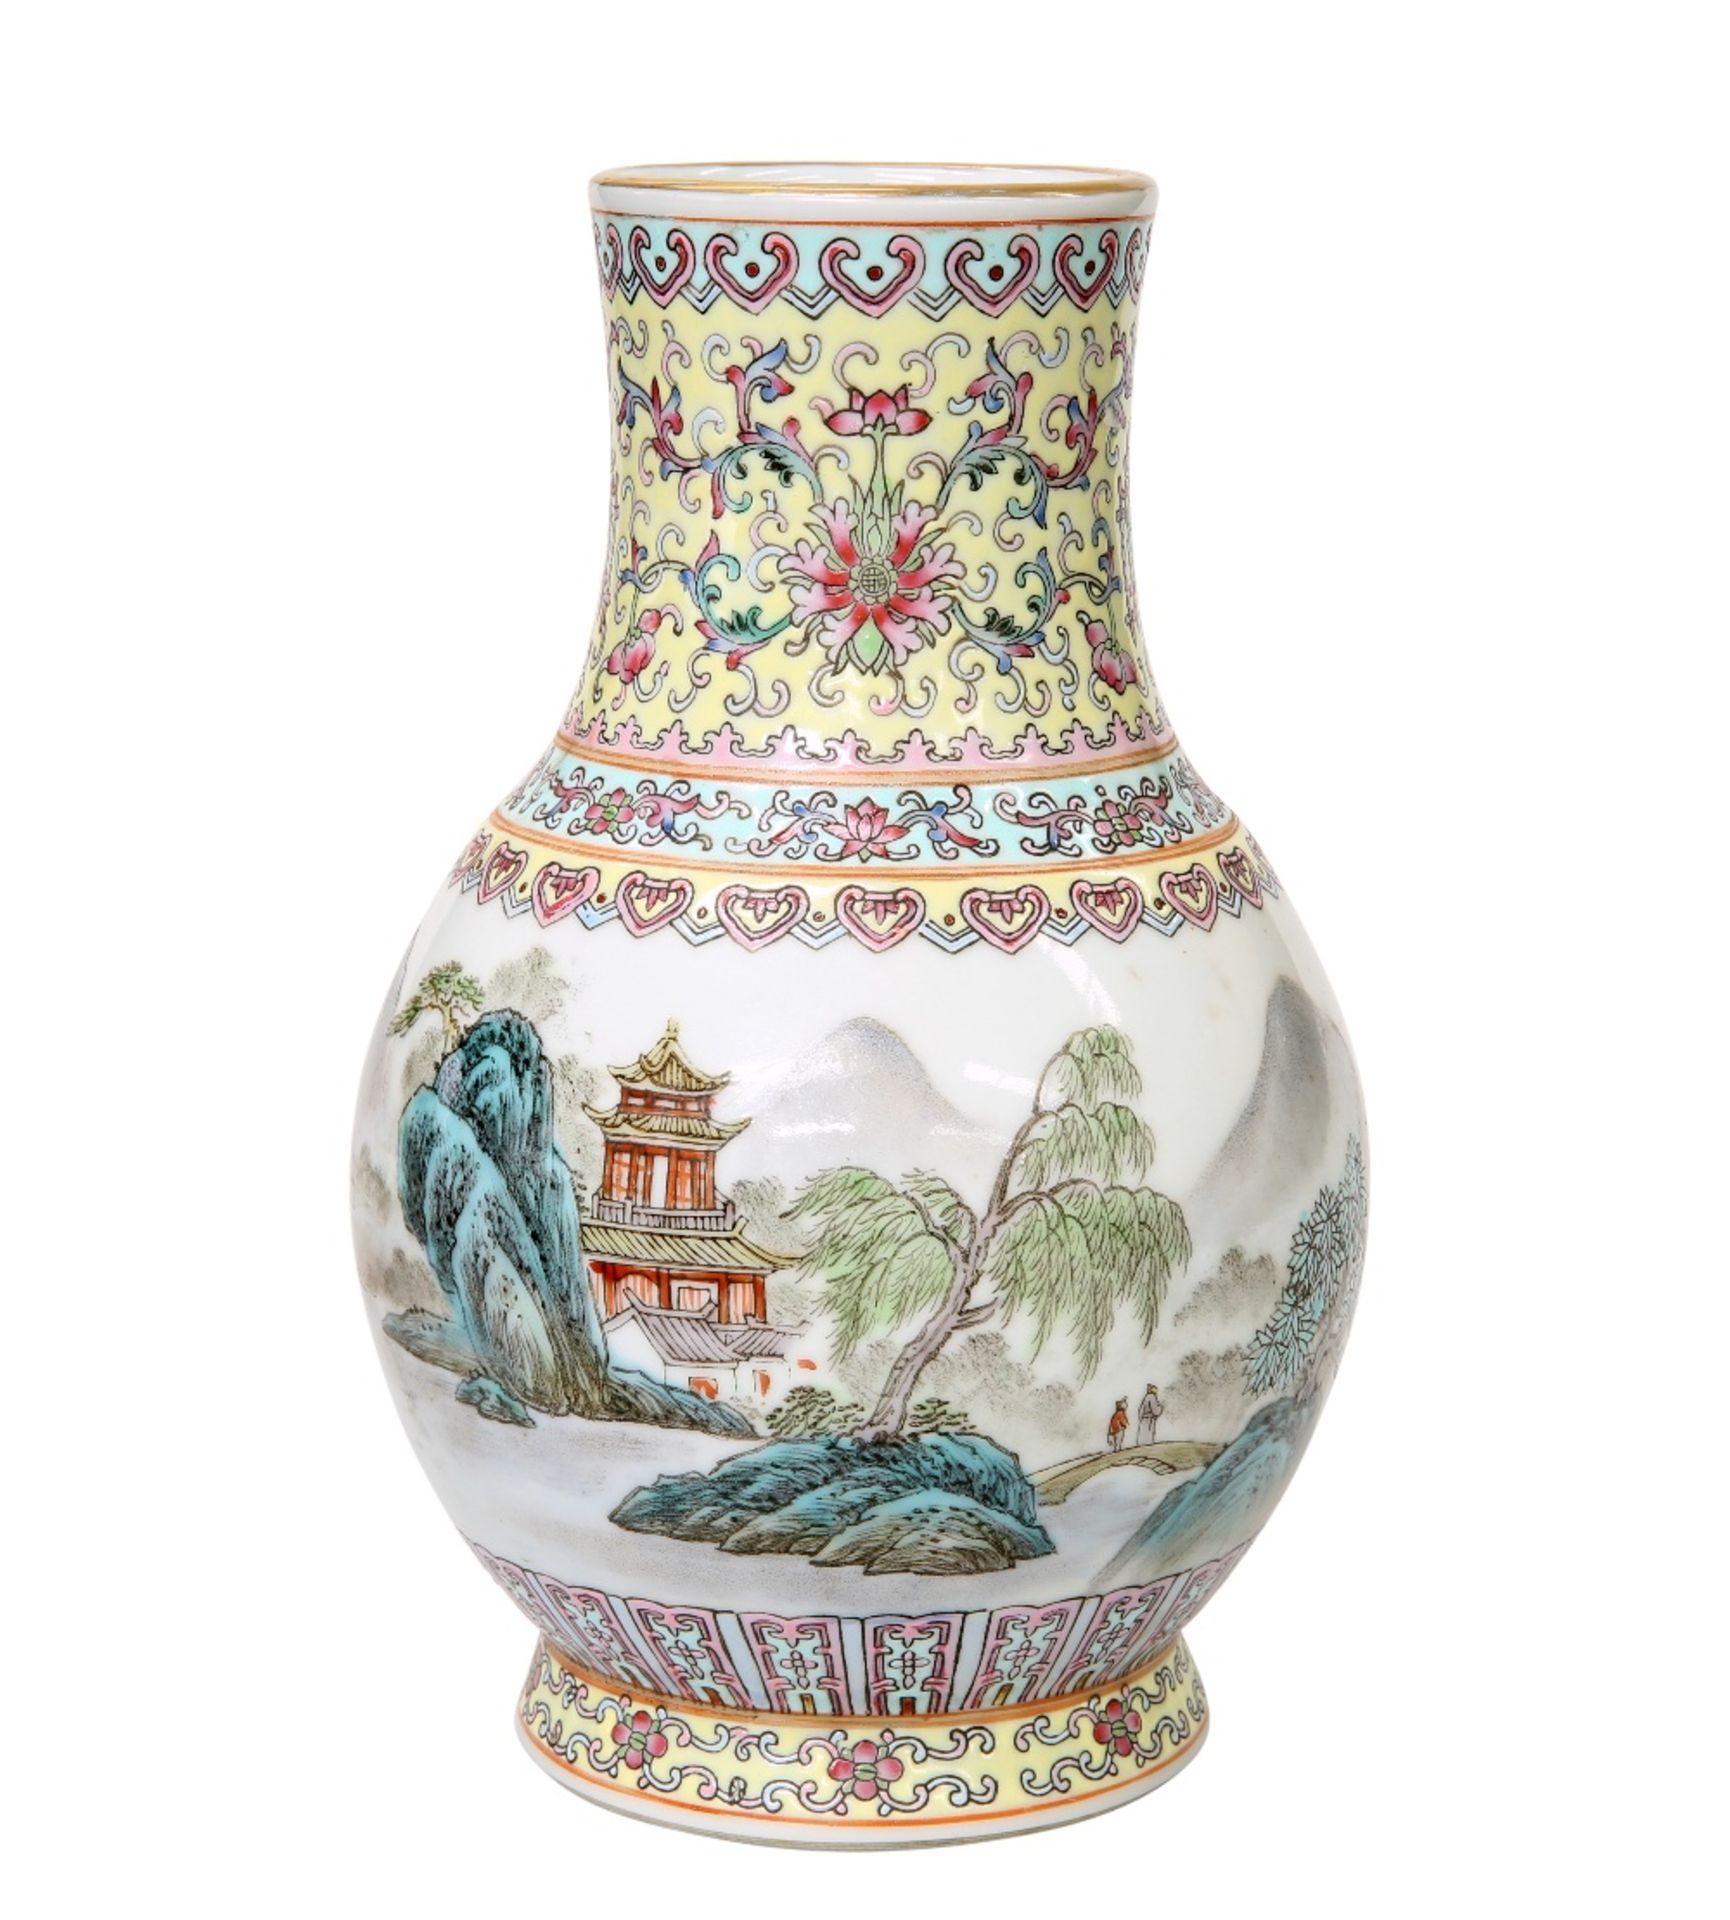 A CHINESE REPUBLICAN STYLE PORCELAIN VASE